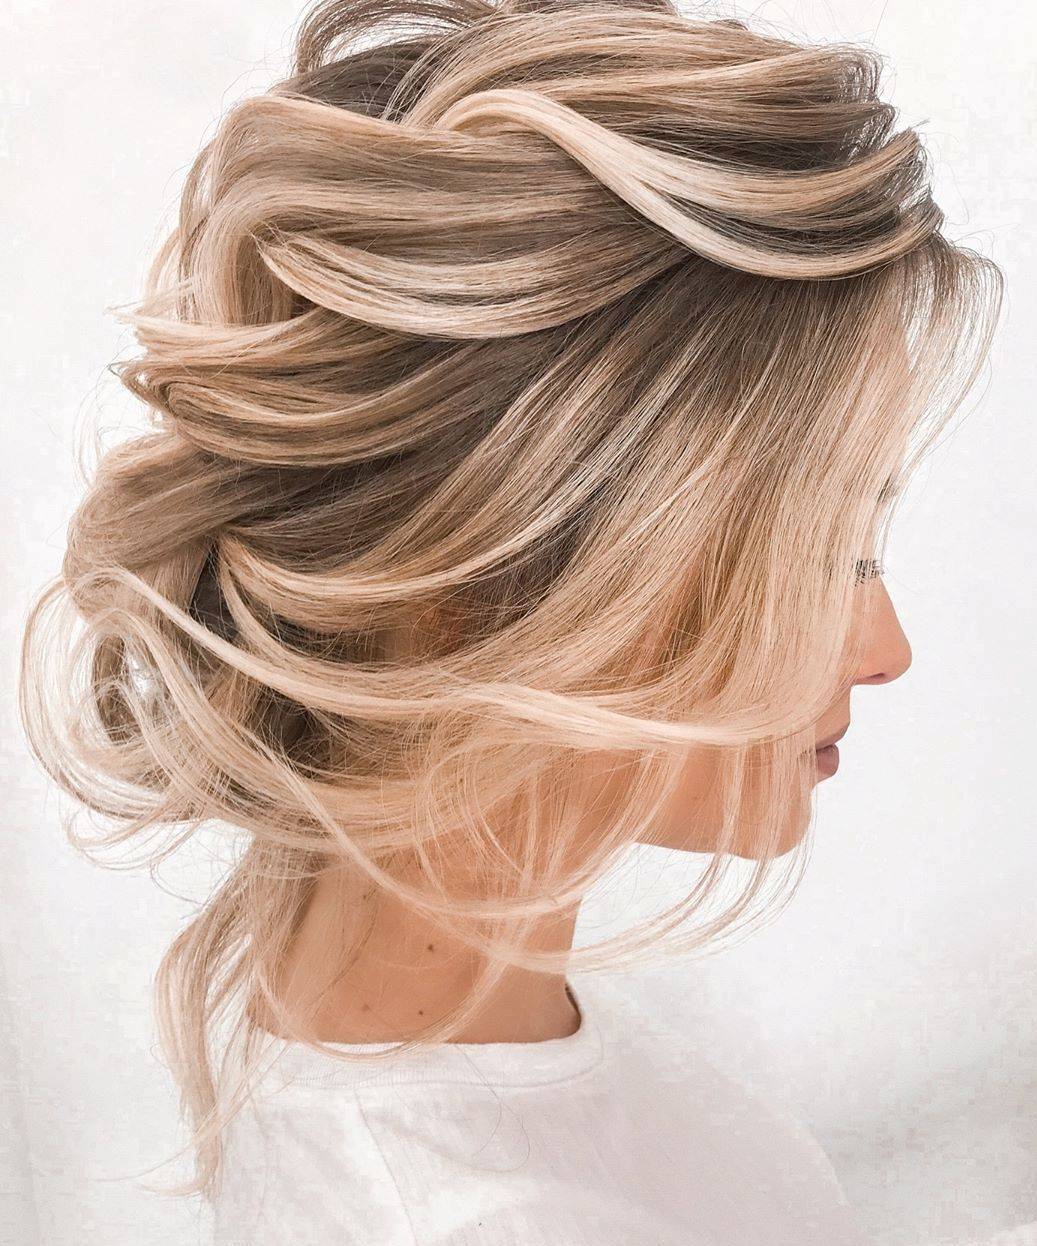 50 Lovely Updo Hairstyles That Are Trendy for 2021